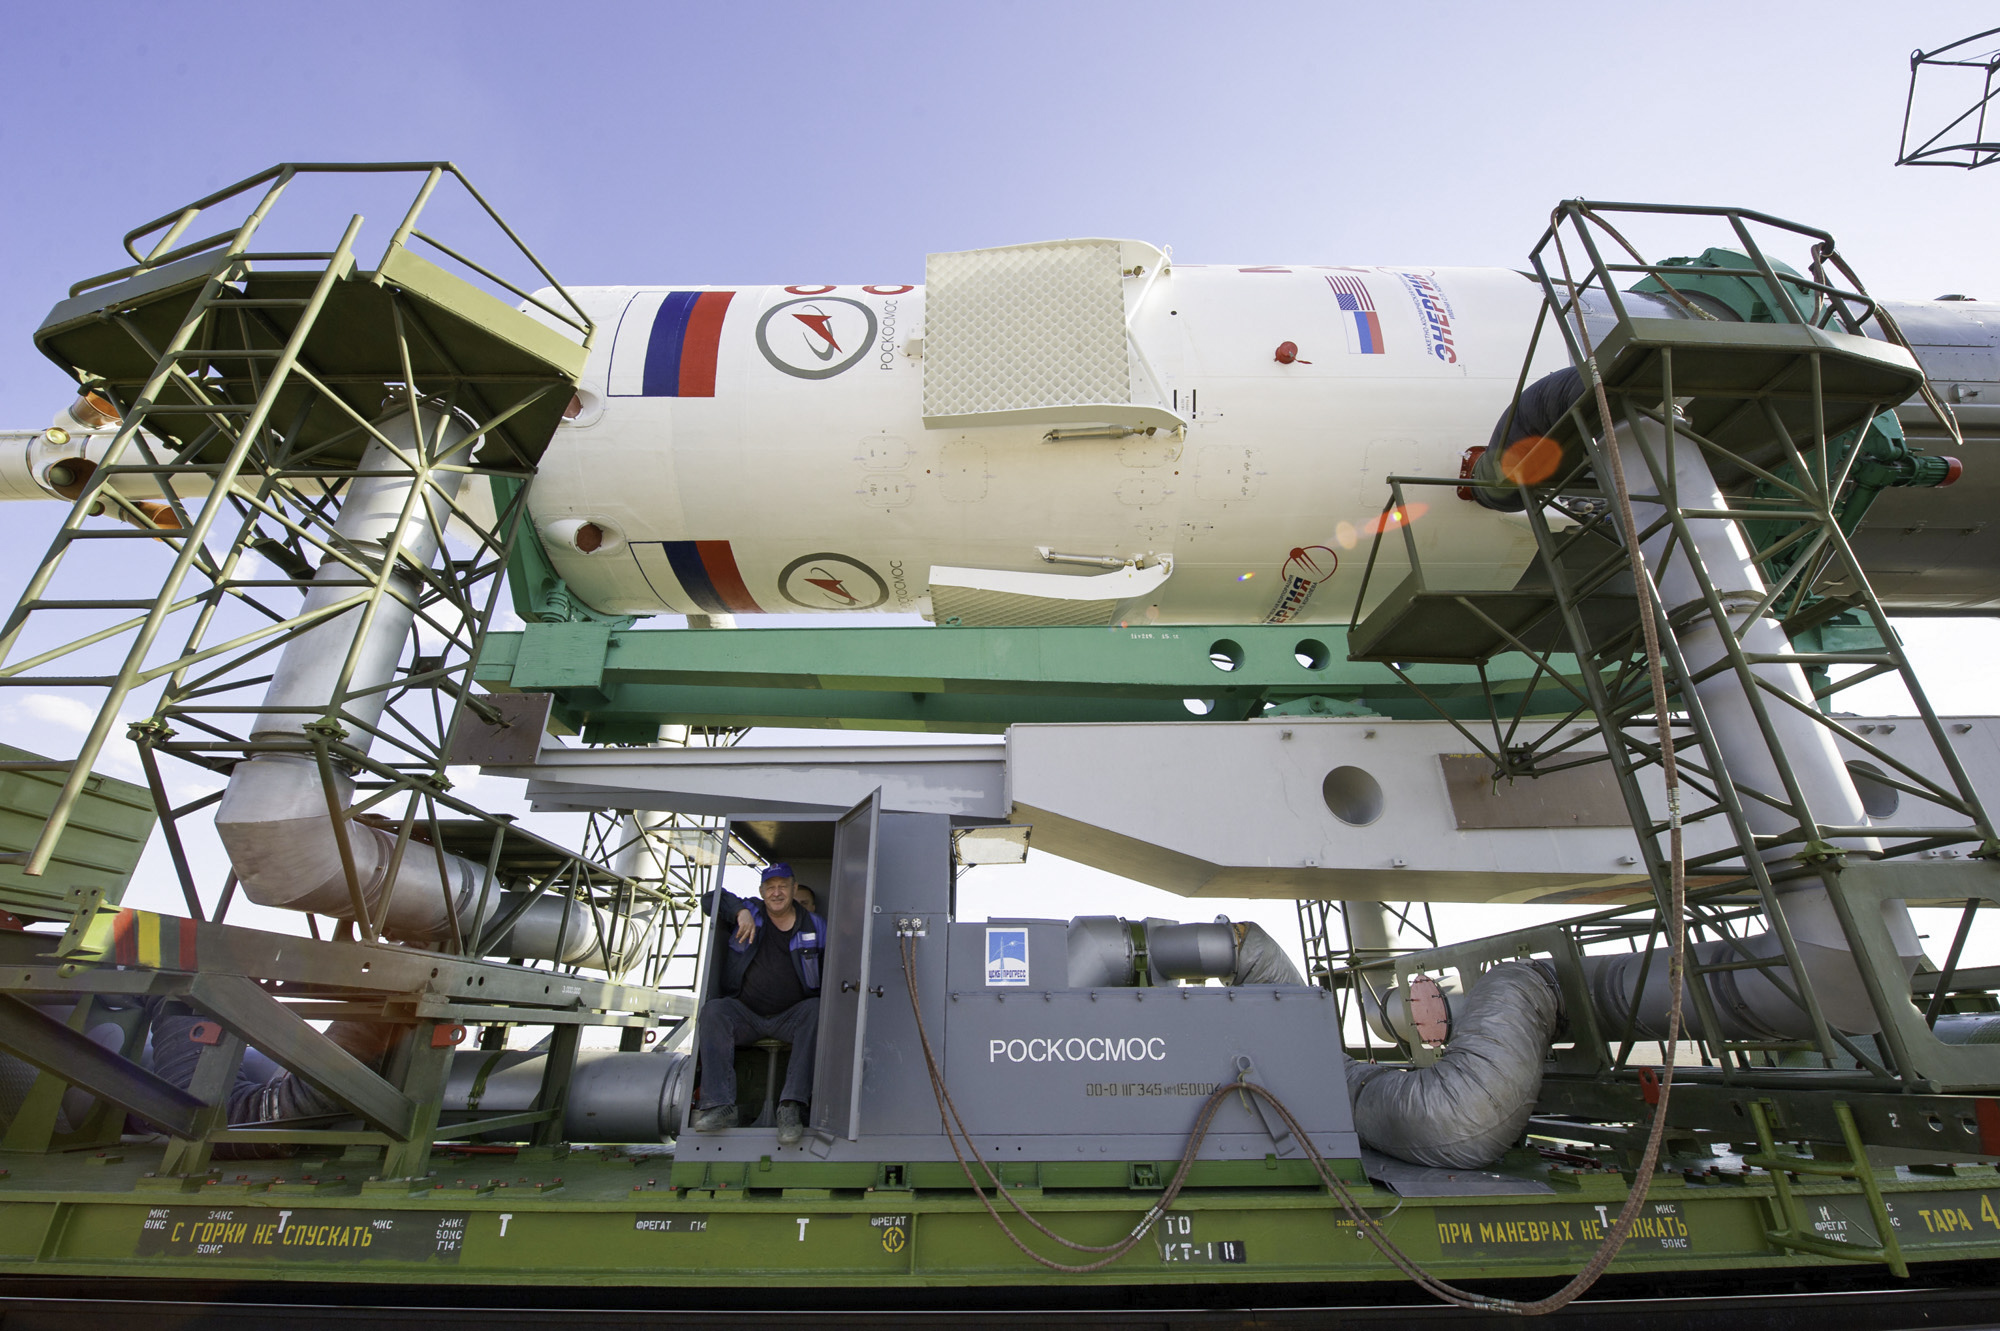  The upper stage of the Soyuz TMA-02M rocket in which the crew capsule is located is pictured here during the rollout of the rocket on Sunday, June 5, 2011 at the Baikonur Cosmodrome in Kazakhstan. (NASA/Carla Cioffi) 